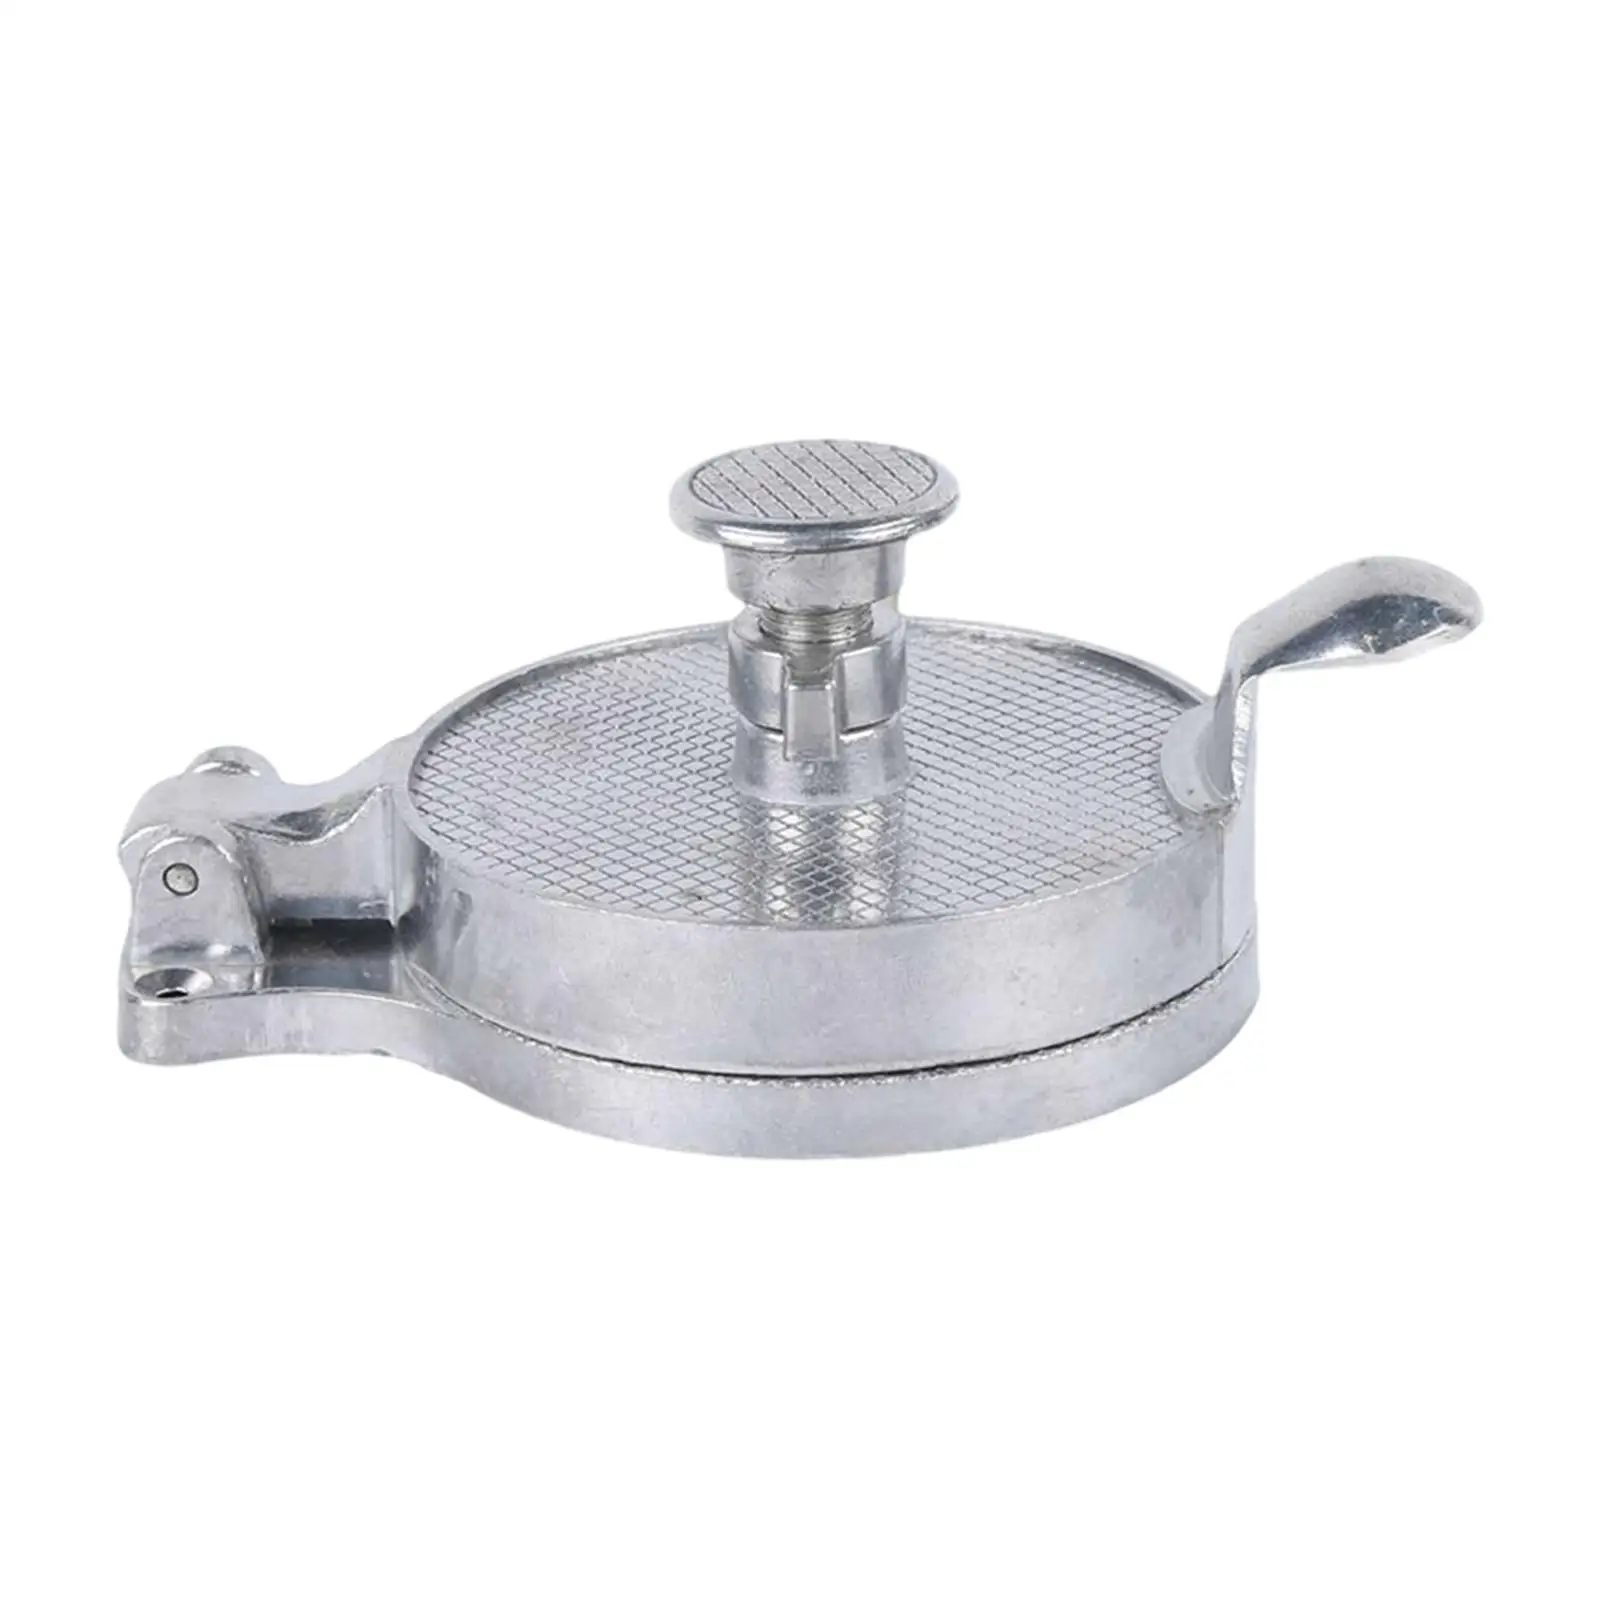 Stainless Steel Burger Press Kitchen Meat Press Grill Cooking Smasher Press Meat Steak for Paninis Barbecue Steak Sandwiches